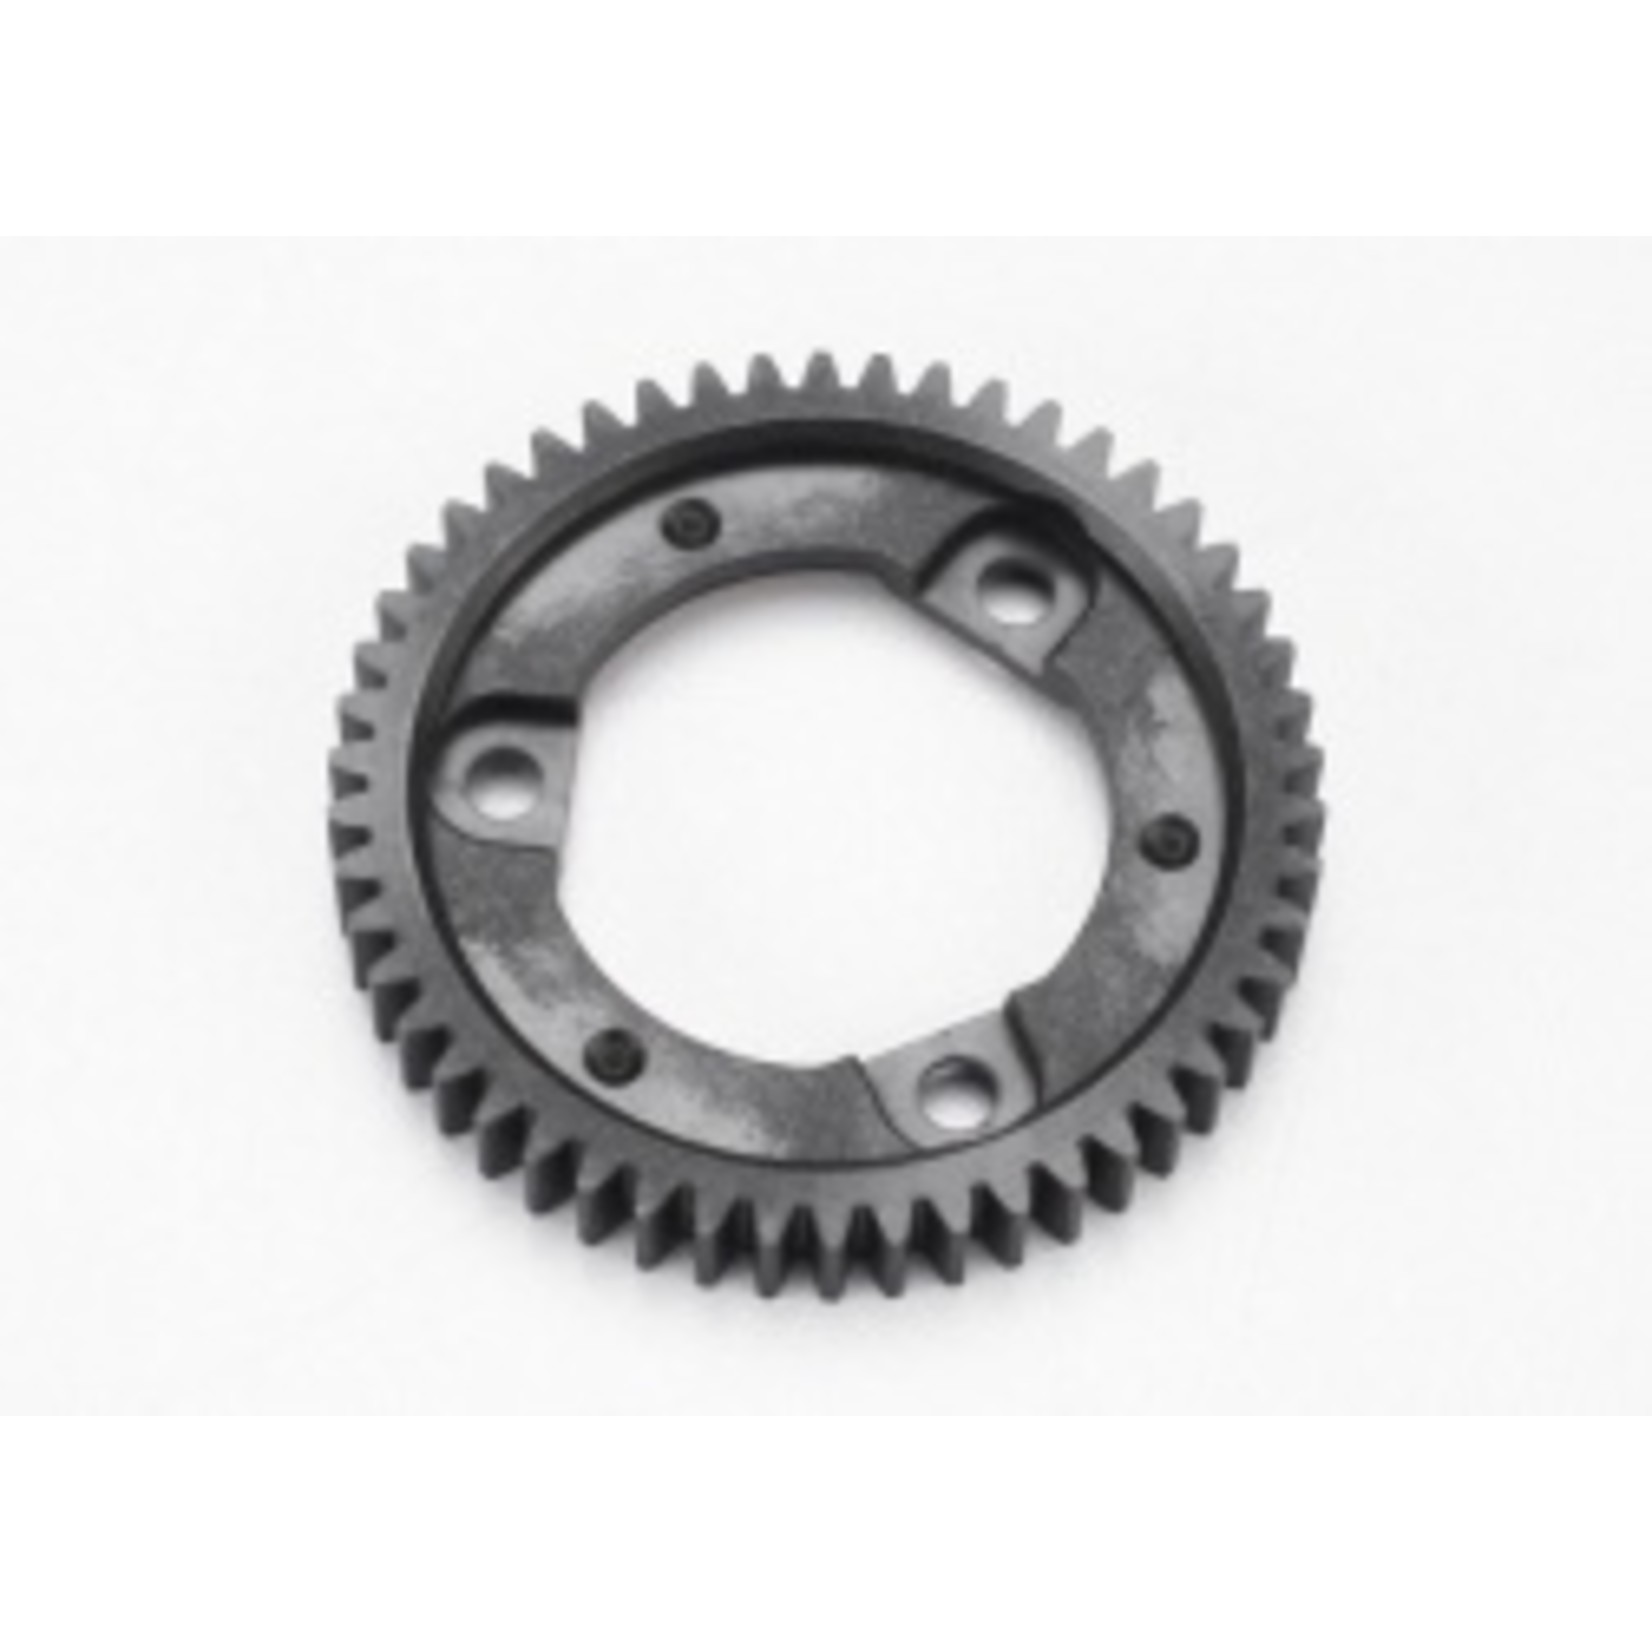 Traxxas 6842R Spur gear, 50-tooth (0.8 metric pitch, compatible with 32-pitch) (for center differential)